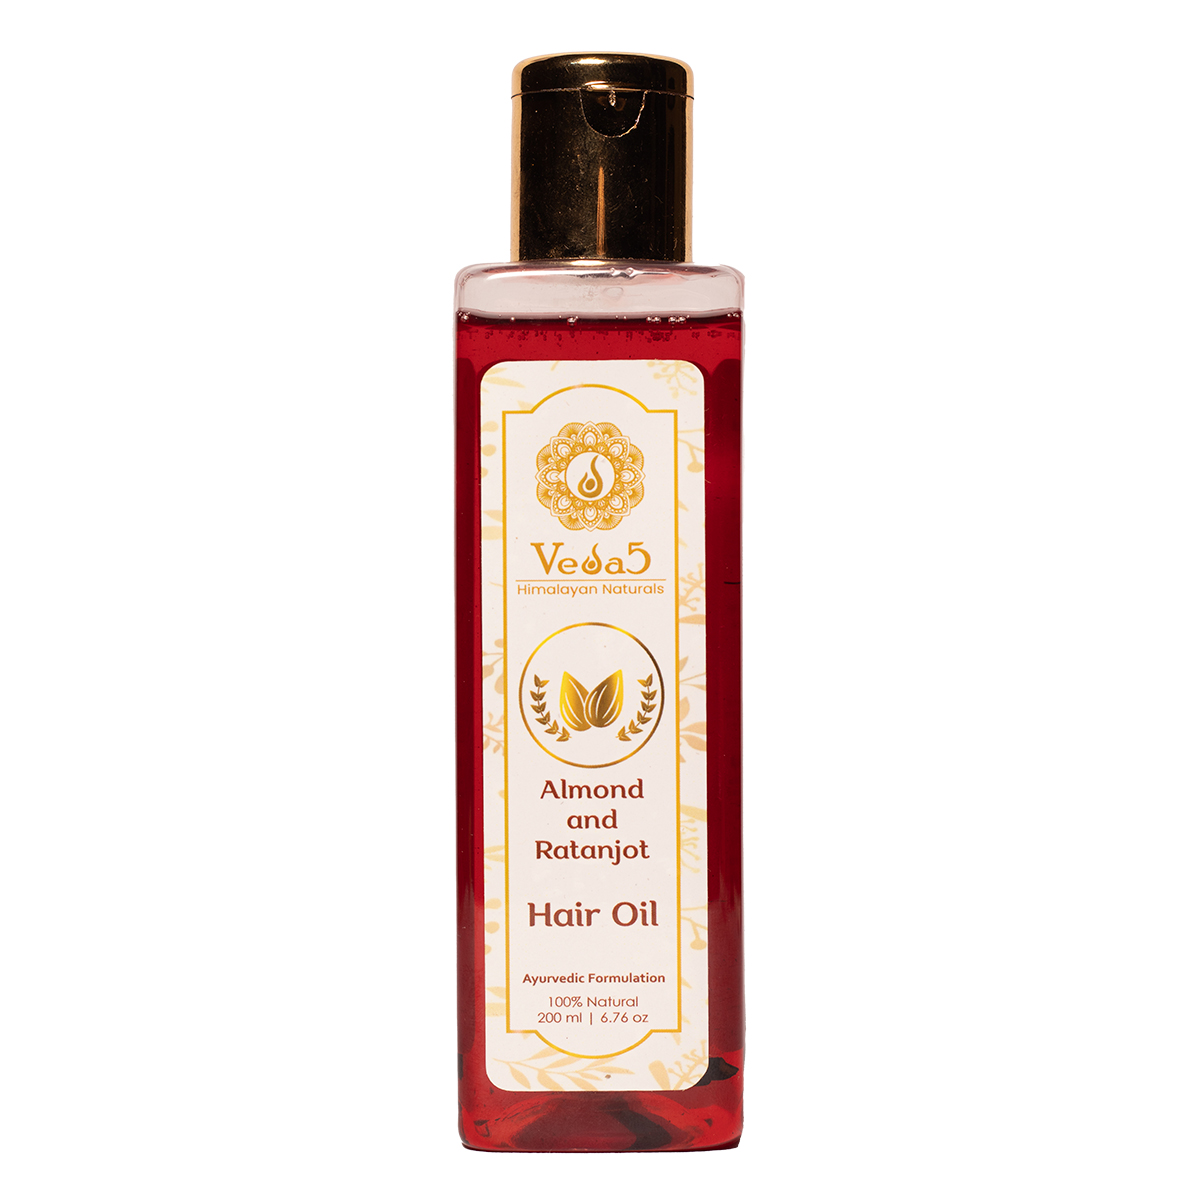 Almond and Ratanjot Hair Oil by Veda5 Himalayan Naturals 1